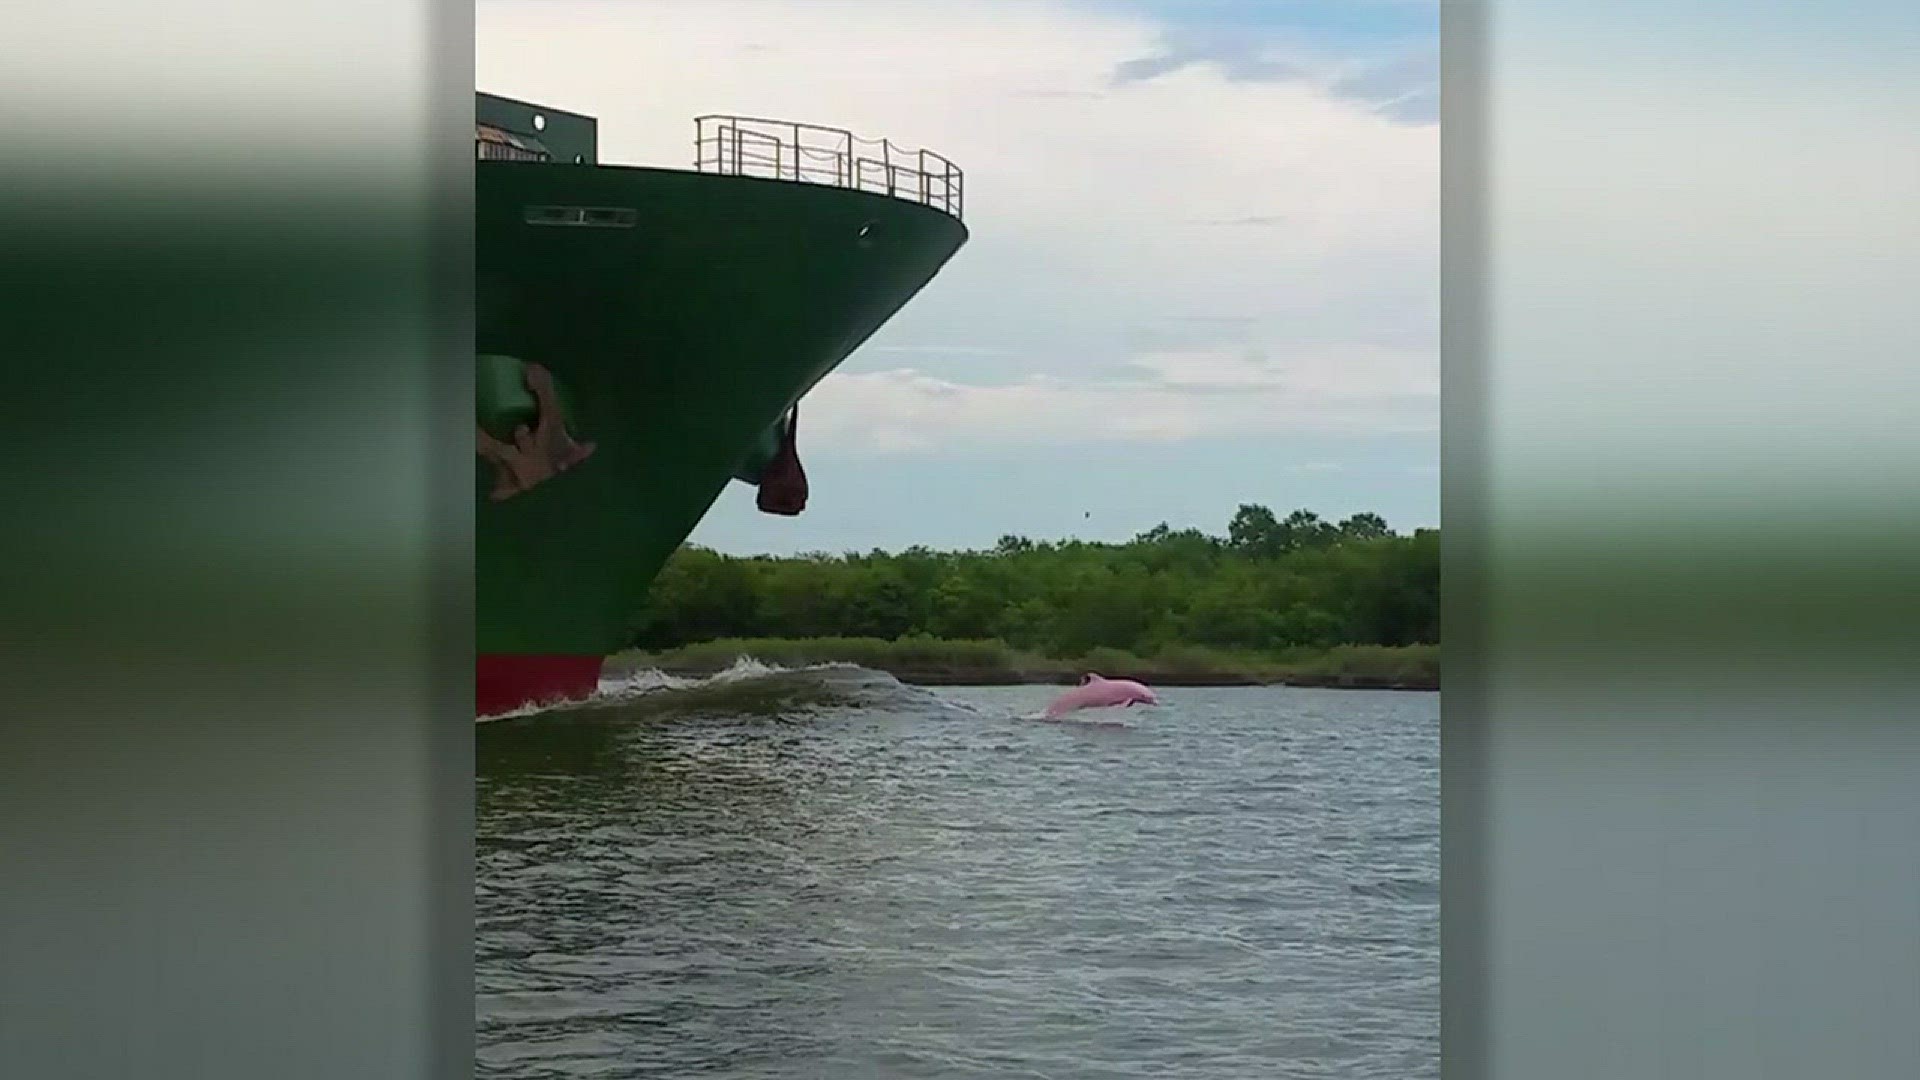 A photo of a pink dolphin spotted in a Louisiana waterway is making its rounds on social media. But is it real?